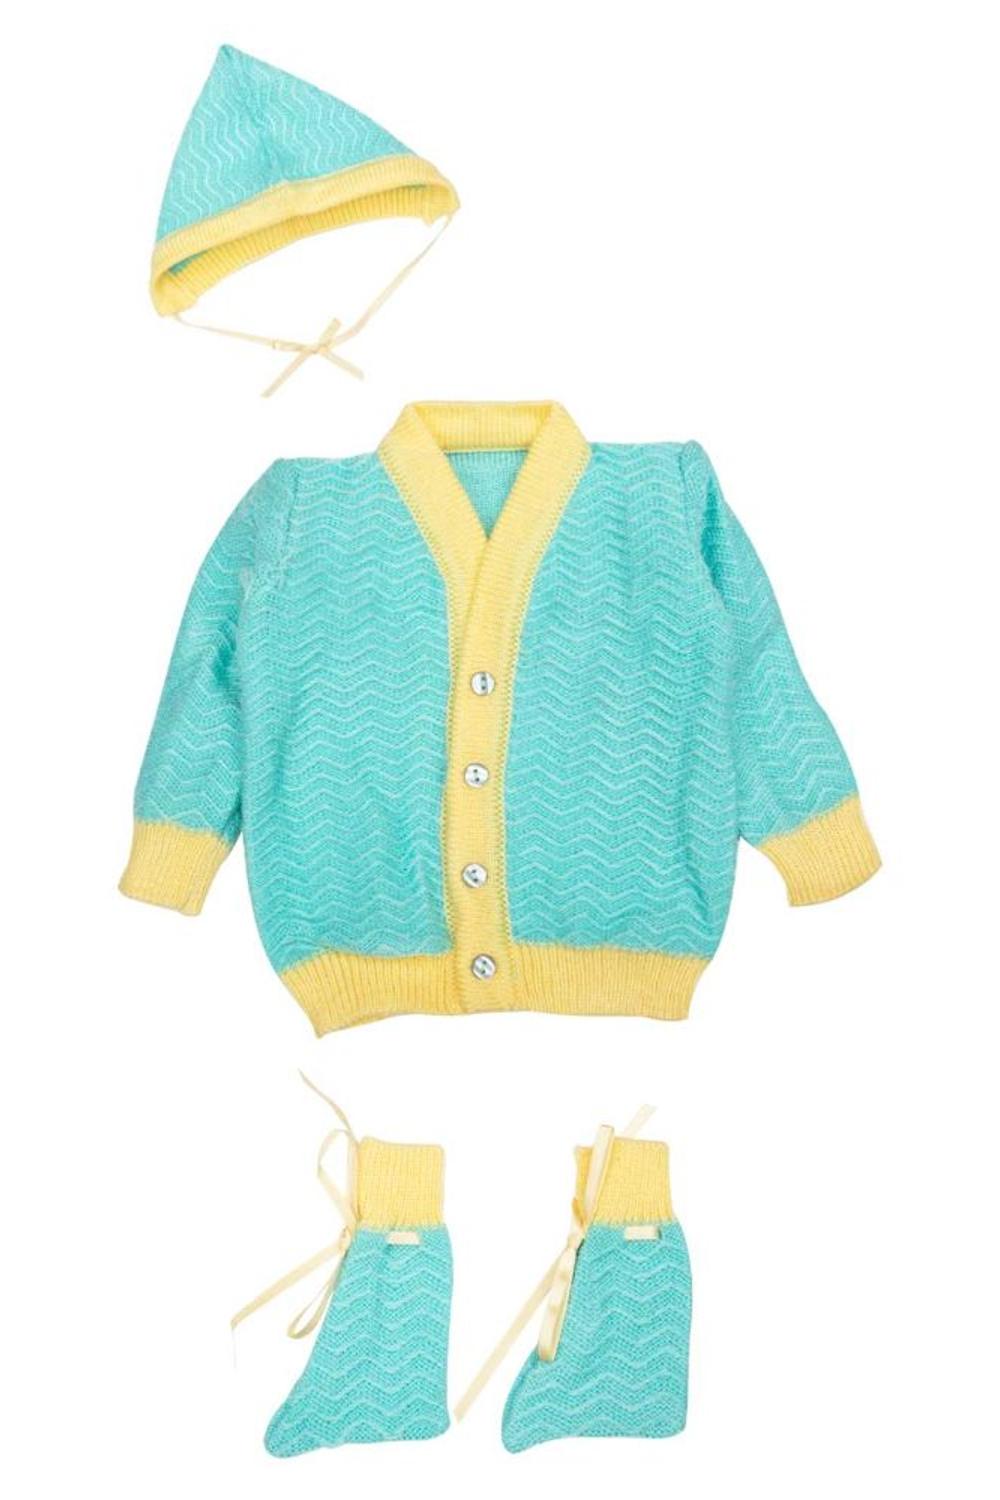 Mee Mee Baby Sweater Sets (Green, Yellow)